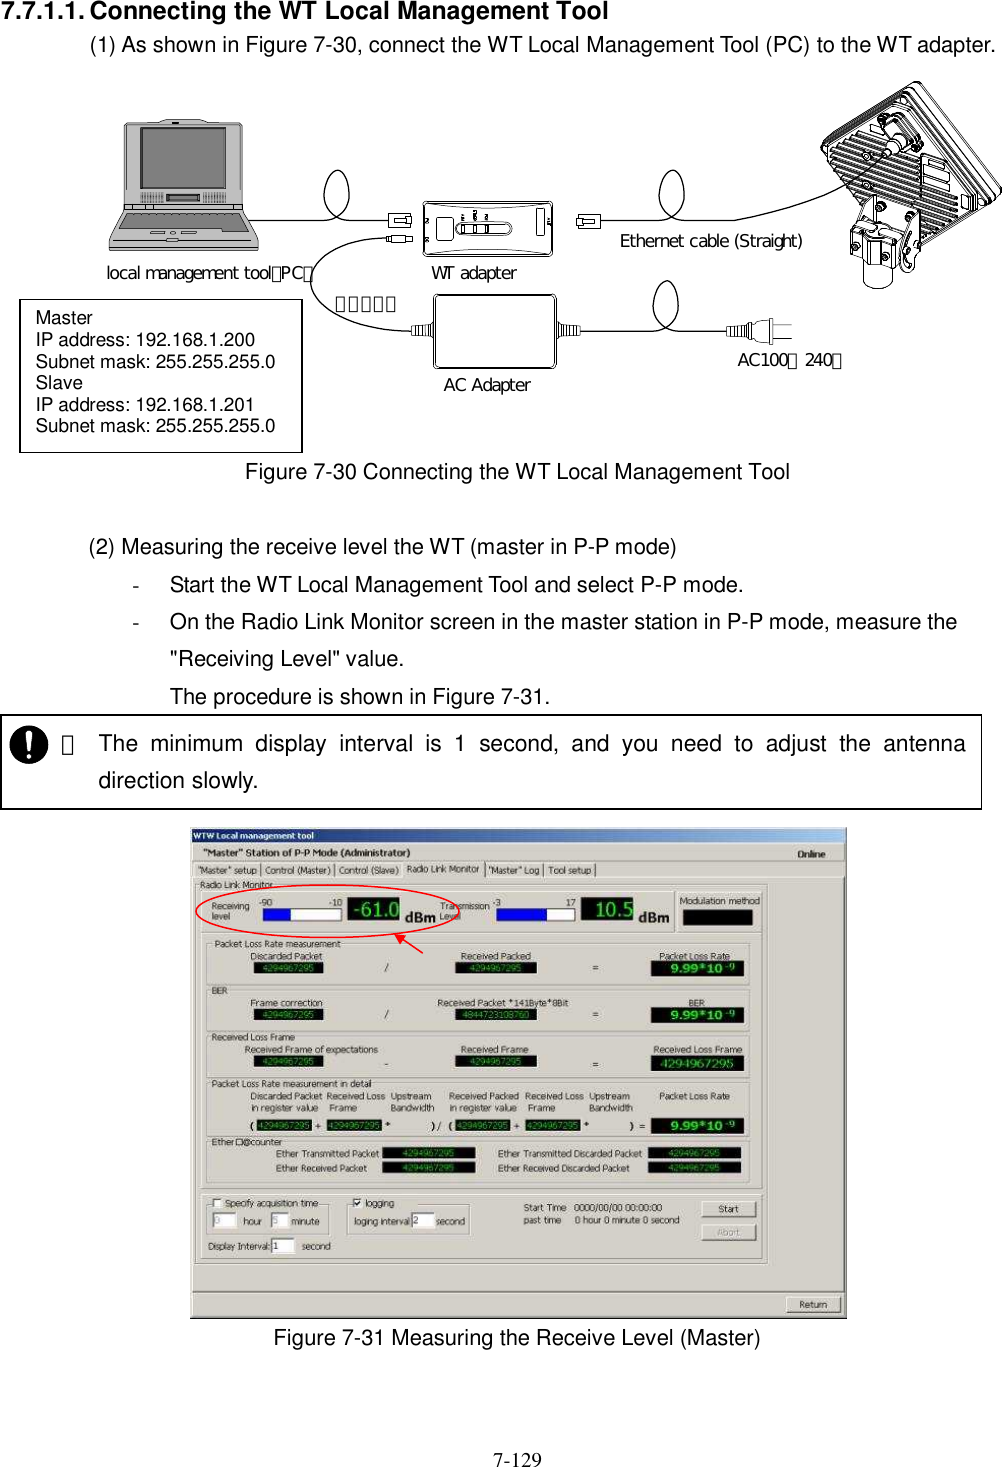   7-129 7.7.1.1. Connecting the WT Local Management Tool (1) As shown in Figure 7-30, connect the WT Local Management Tool (PC) to the WT adapter.  Figure 7-30 Connecting the WT Local Management Tool  (2) Measuring the receive level the WT (master in P-P mode) -  Start the WT Local Management Tool and select P-P mode. -  On the Radio Link Monitor screen in the master station in P-P mode, measure the &quot;Receiving Level&quot; value. The procedure is shown in Figure 7-31.   Figure 7-31 Measuring the Receive Level (Master)    ・ The  minimum  display  interval  is  1  second,  and  you  need  to  adjust  the  antenna direction slowly.   Master IP address: 192.168.1.200 Subnet mask: 255.255.255.0 Slave IP address: 192.168.1.201 Subnet mask: 255.255.255.0  WT adapterAC Adapter AC100∼240ＶＤＣ２４Ｖlocal management tool（PC）Ethernet cable (Straight)